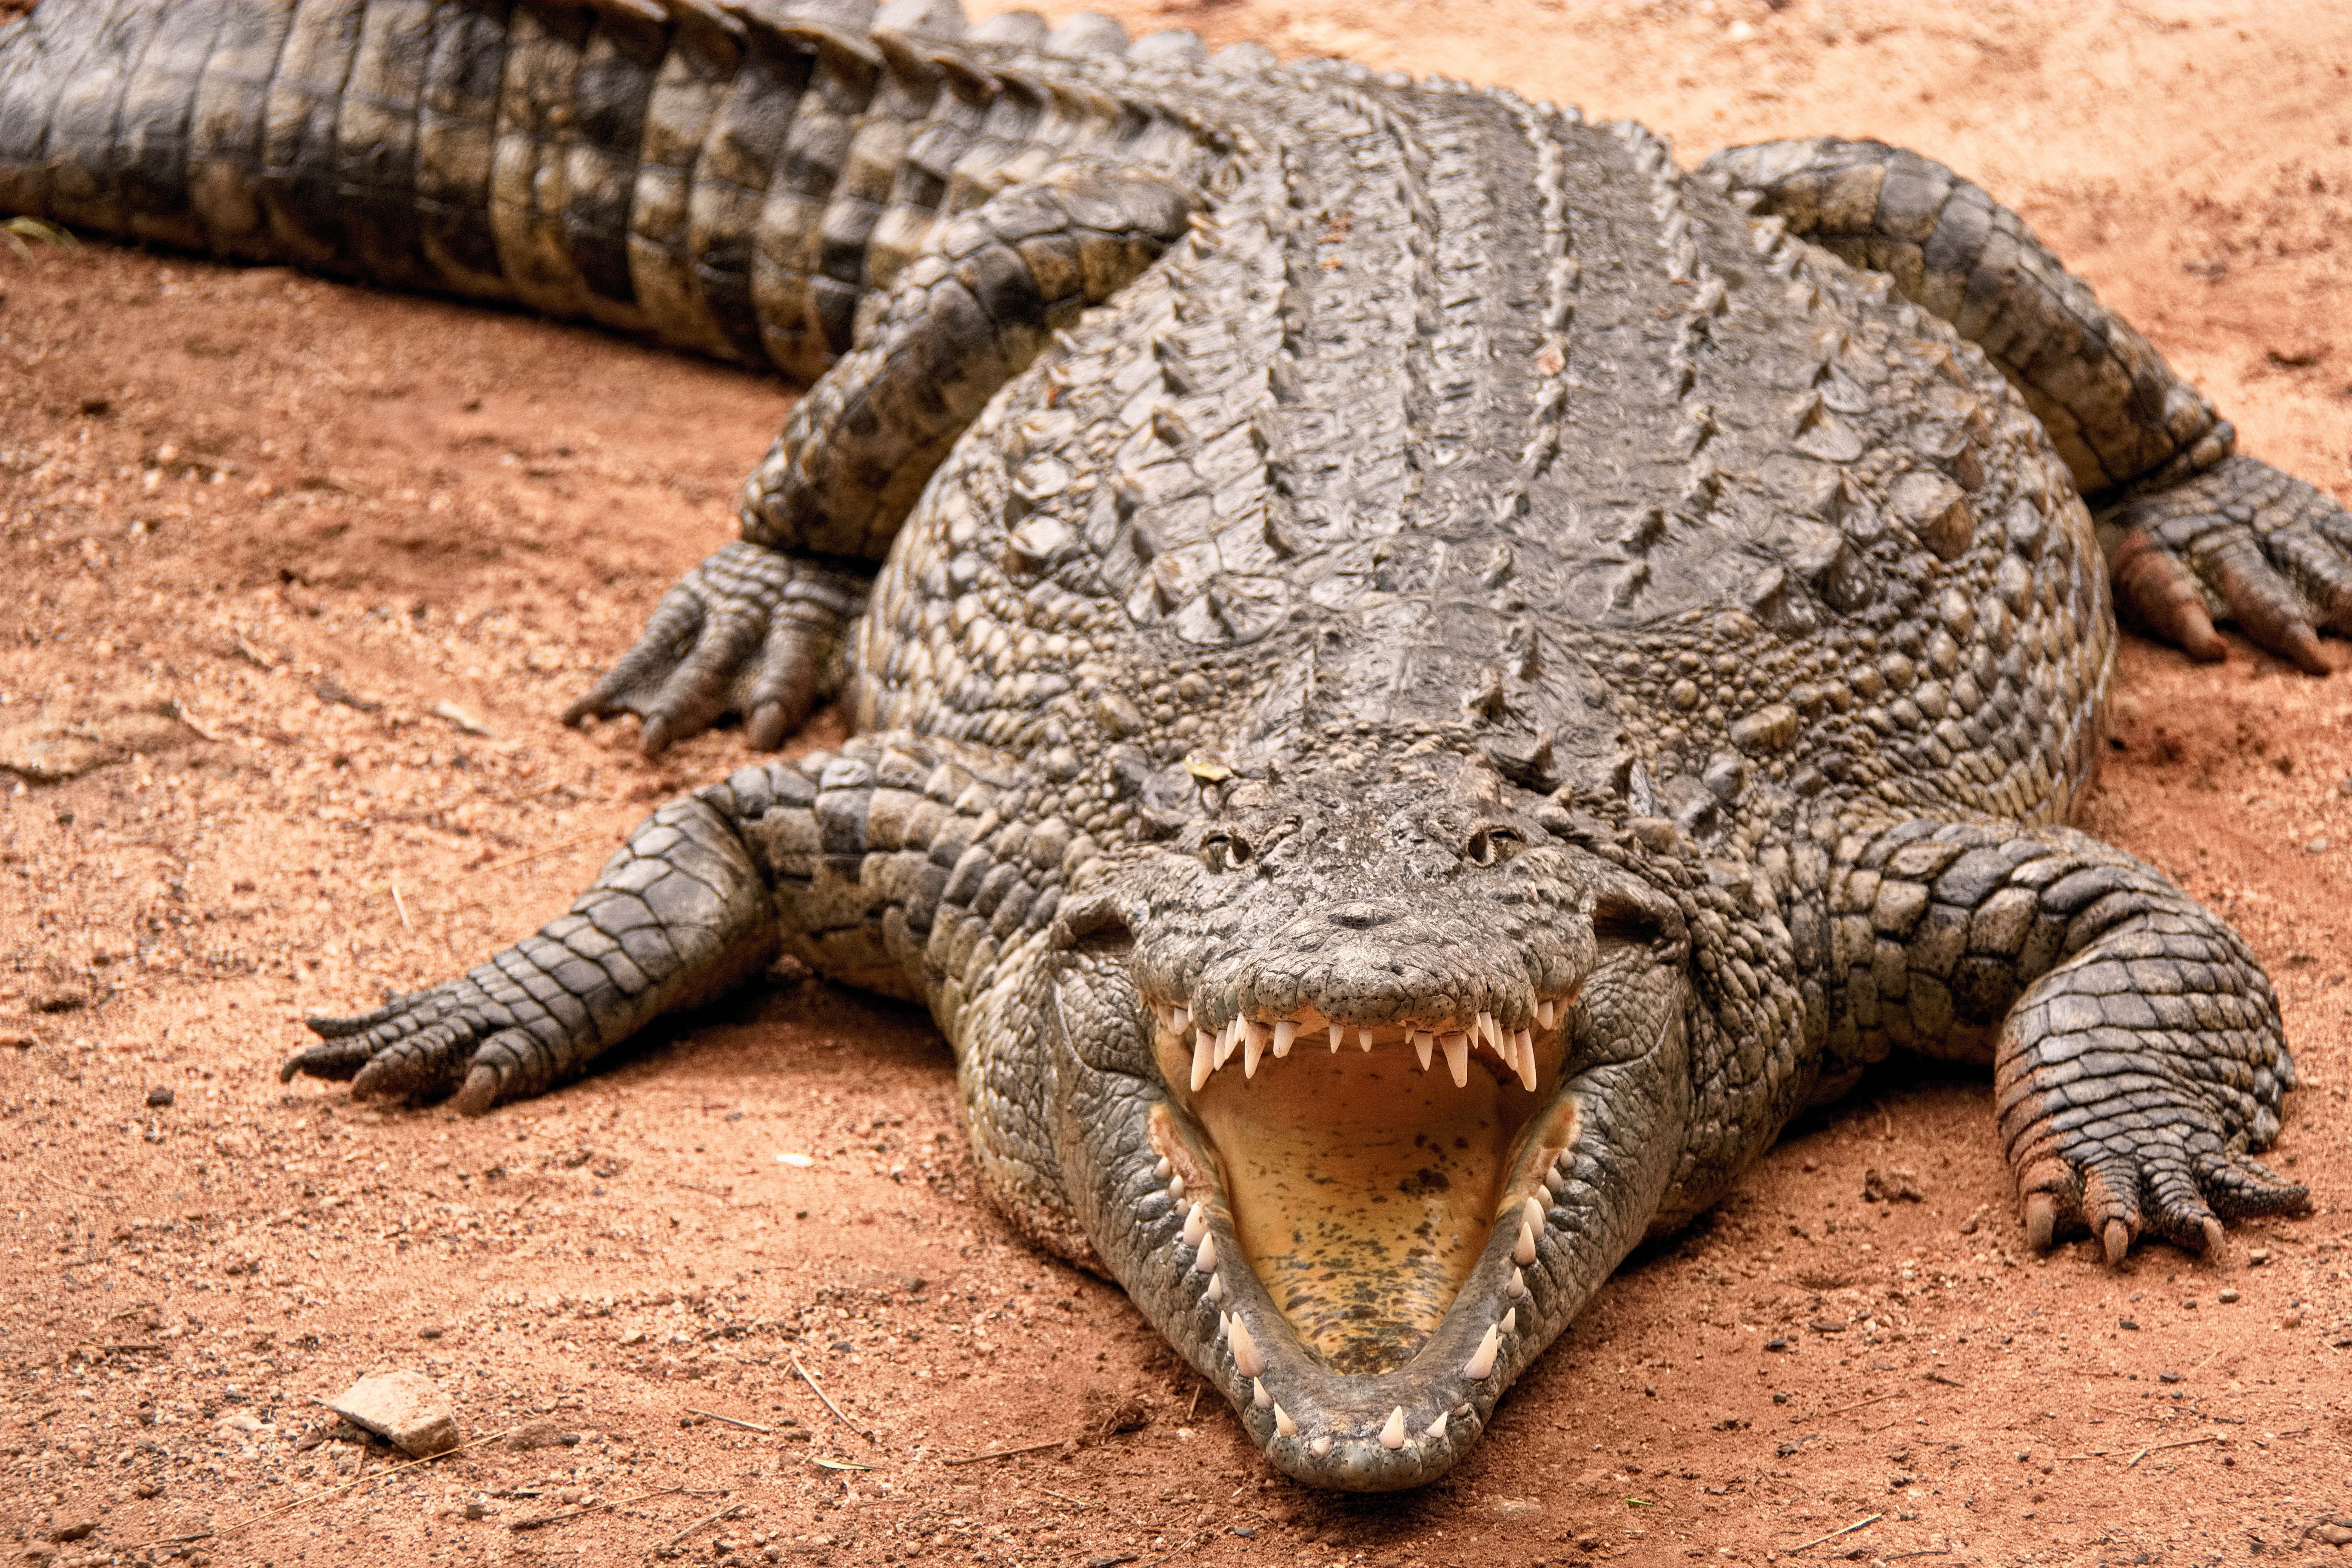 Tourist bitten by crocodile after trying to take a selfie with it